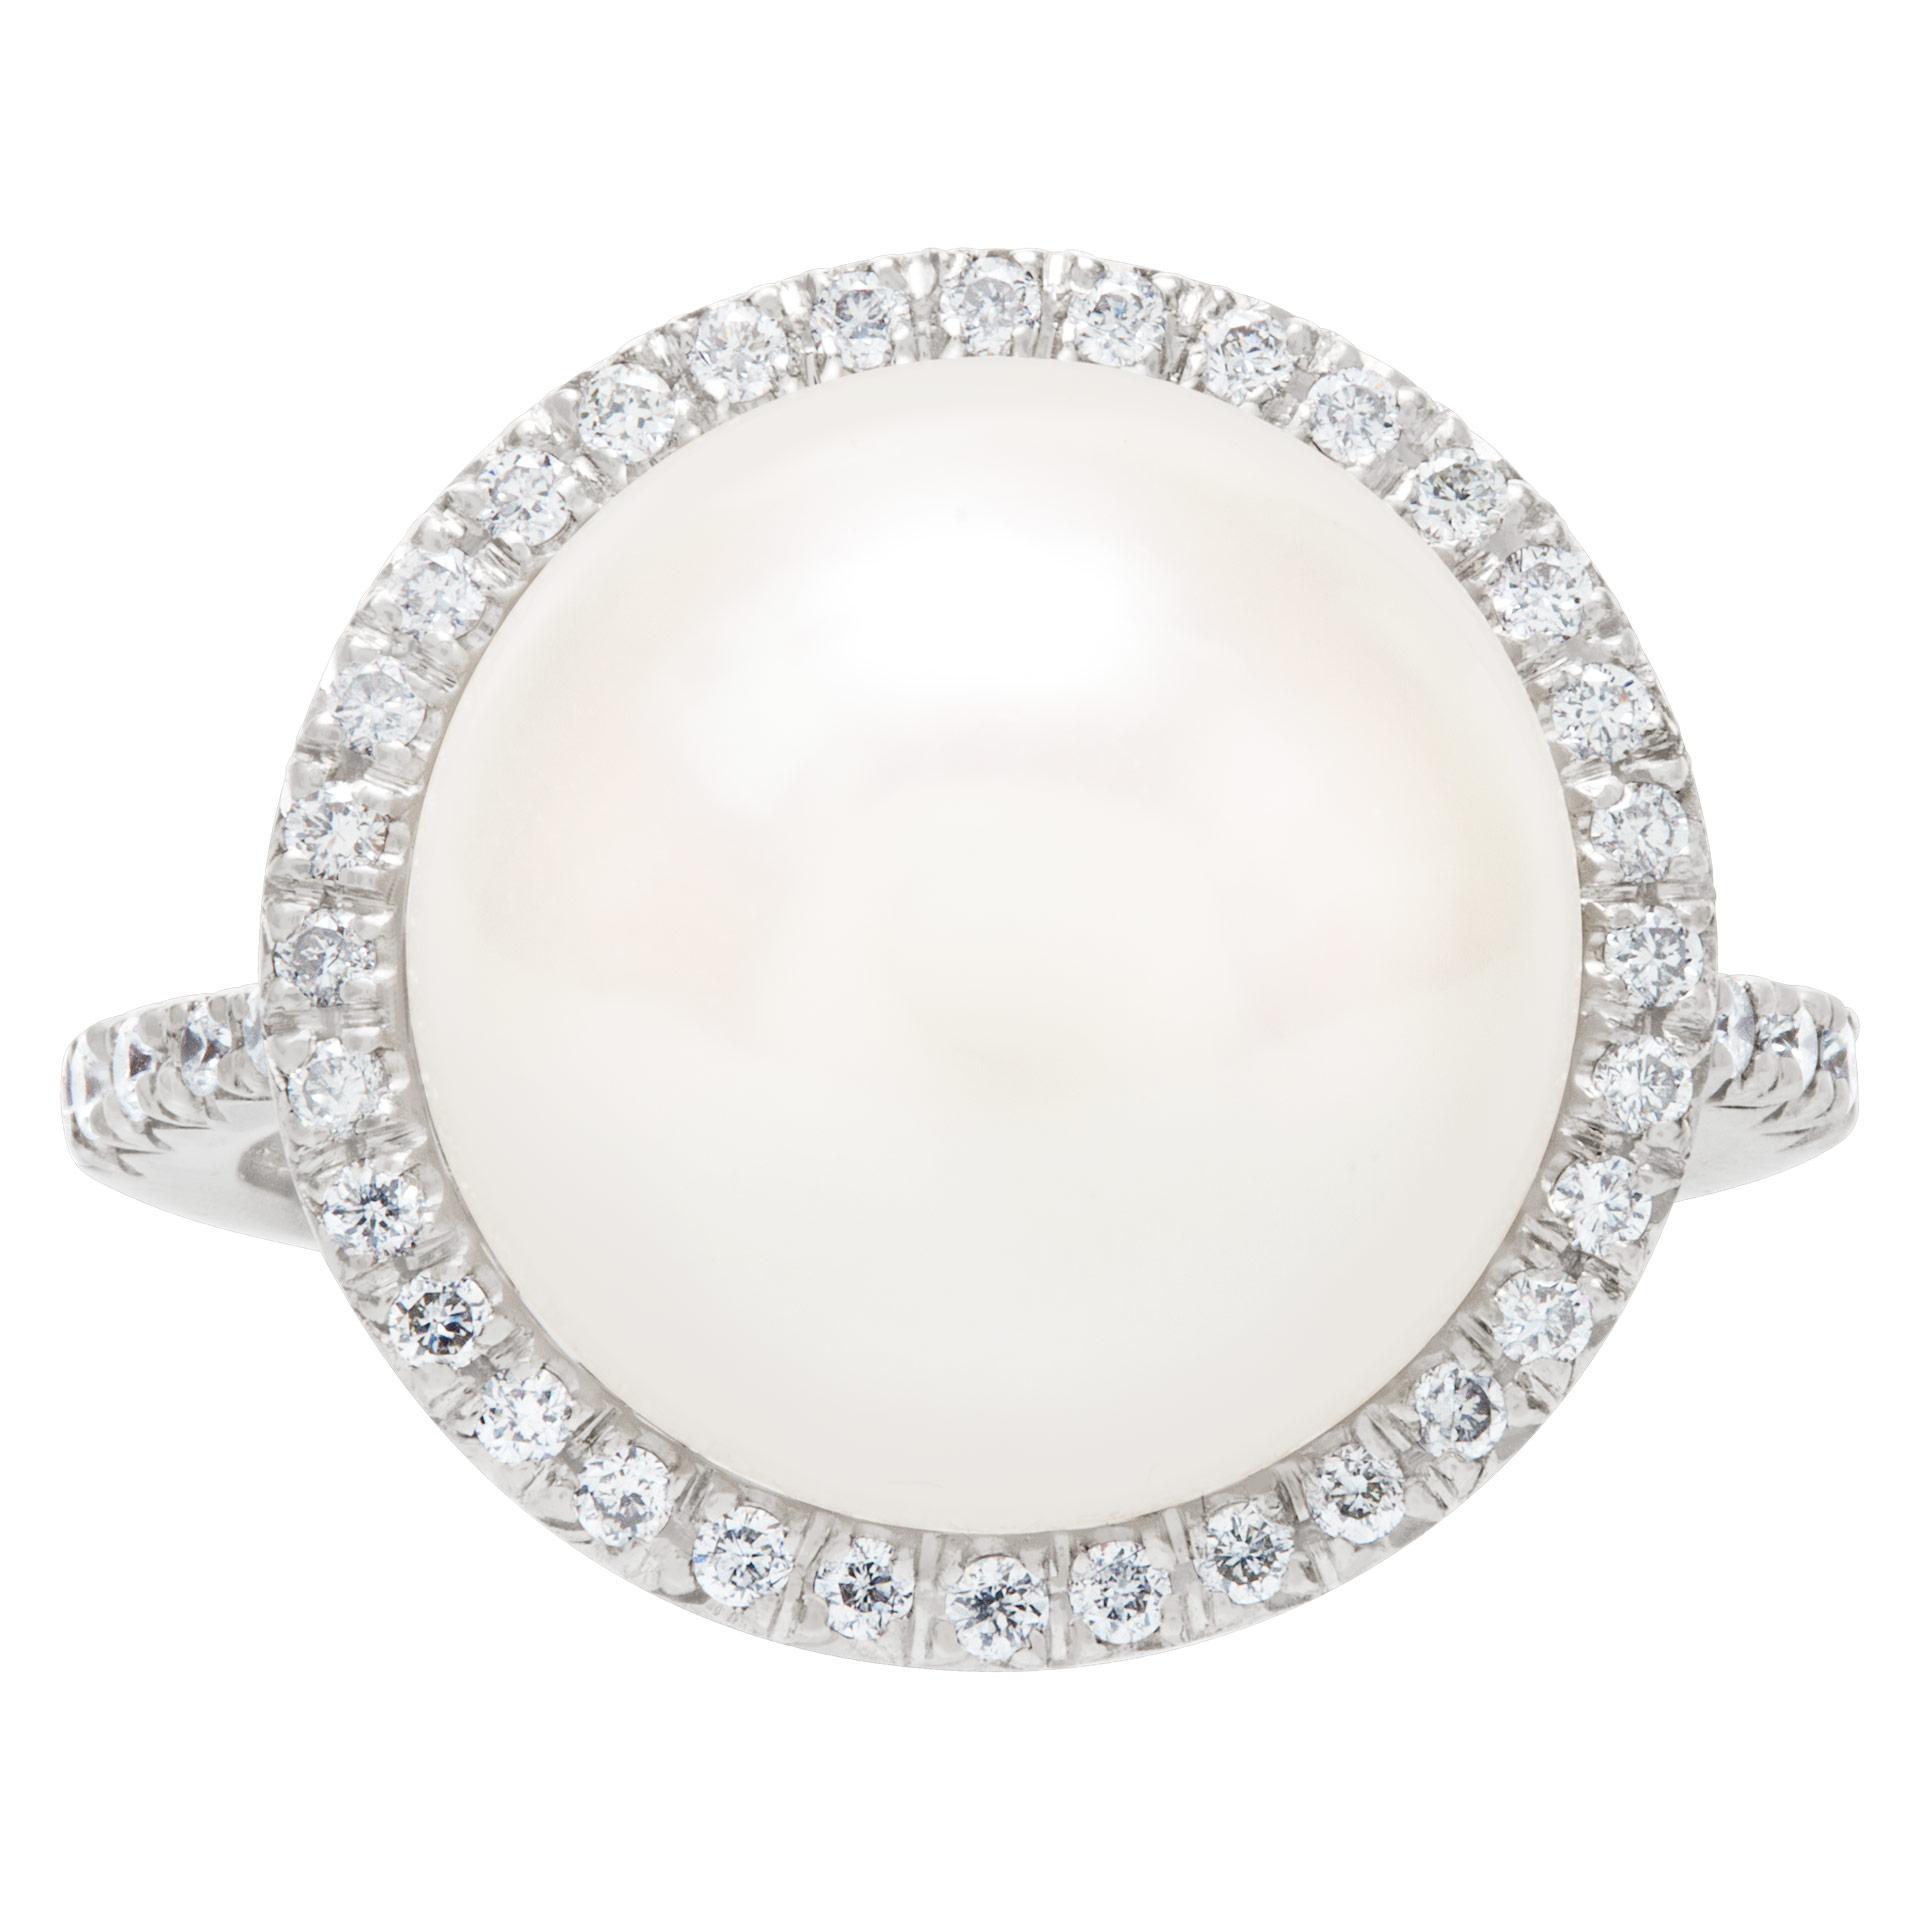 Pearl and diamond ring in 18k white gold. 13.2mm south sea pearl. 0.59 carats